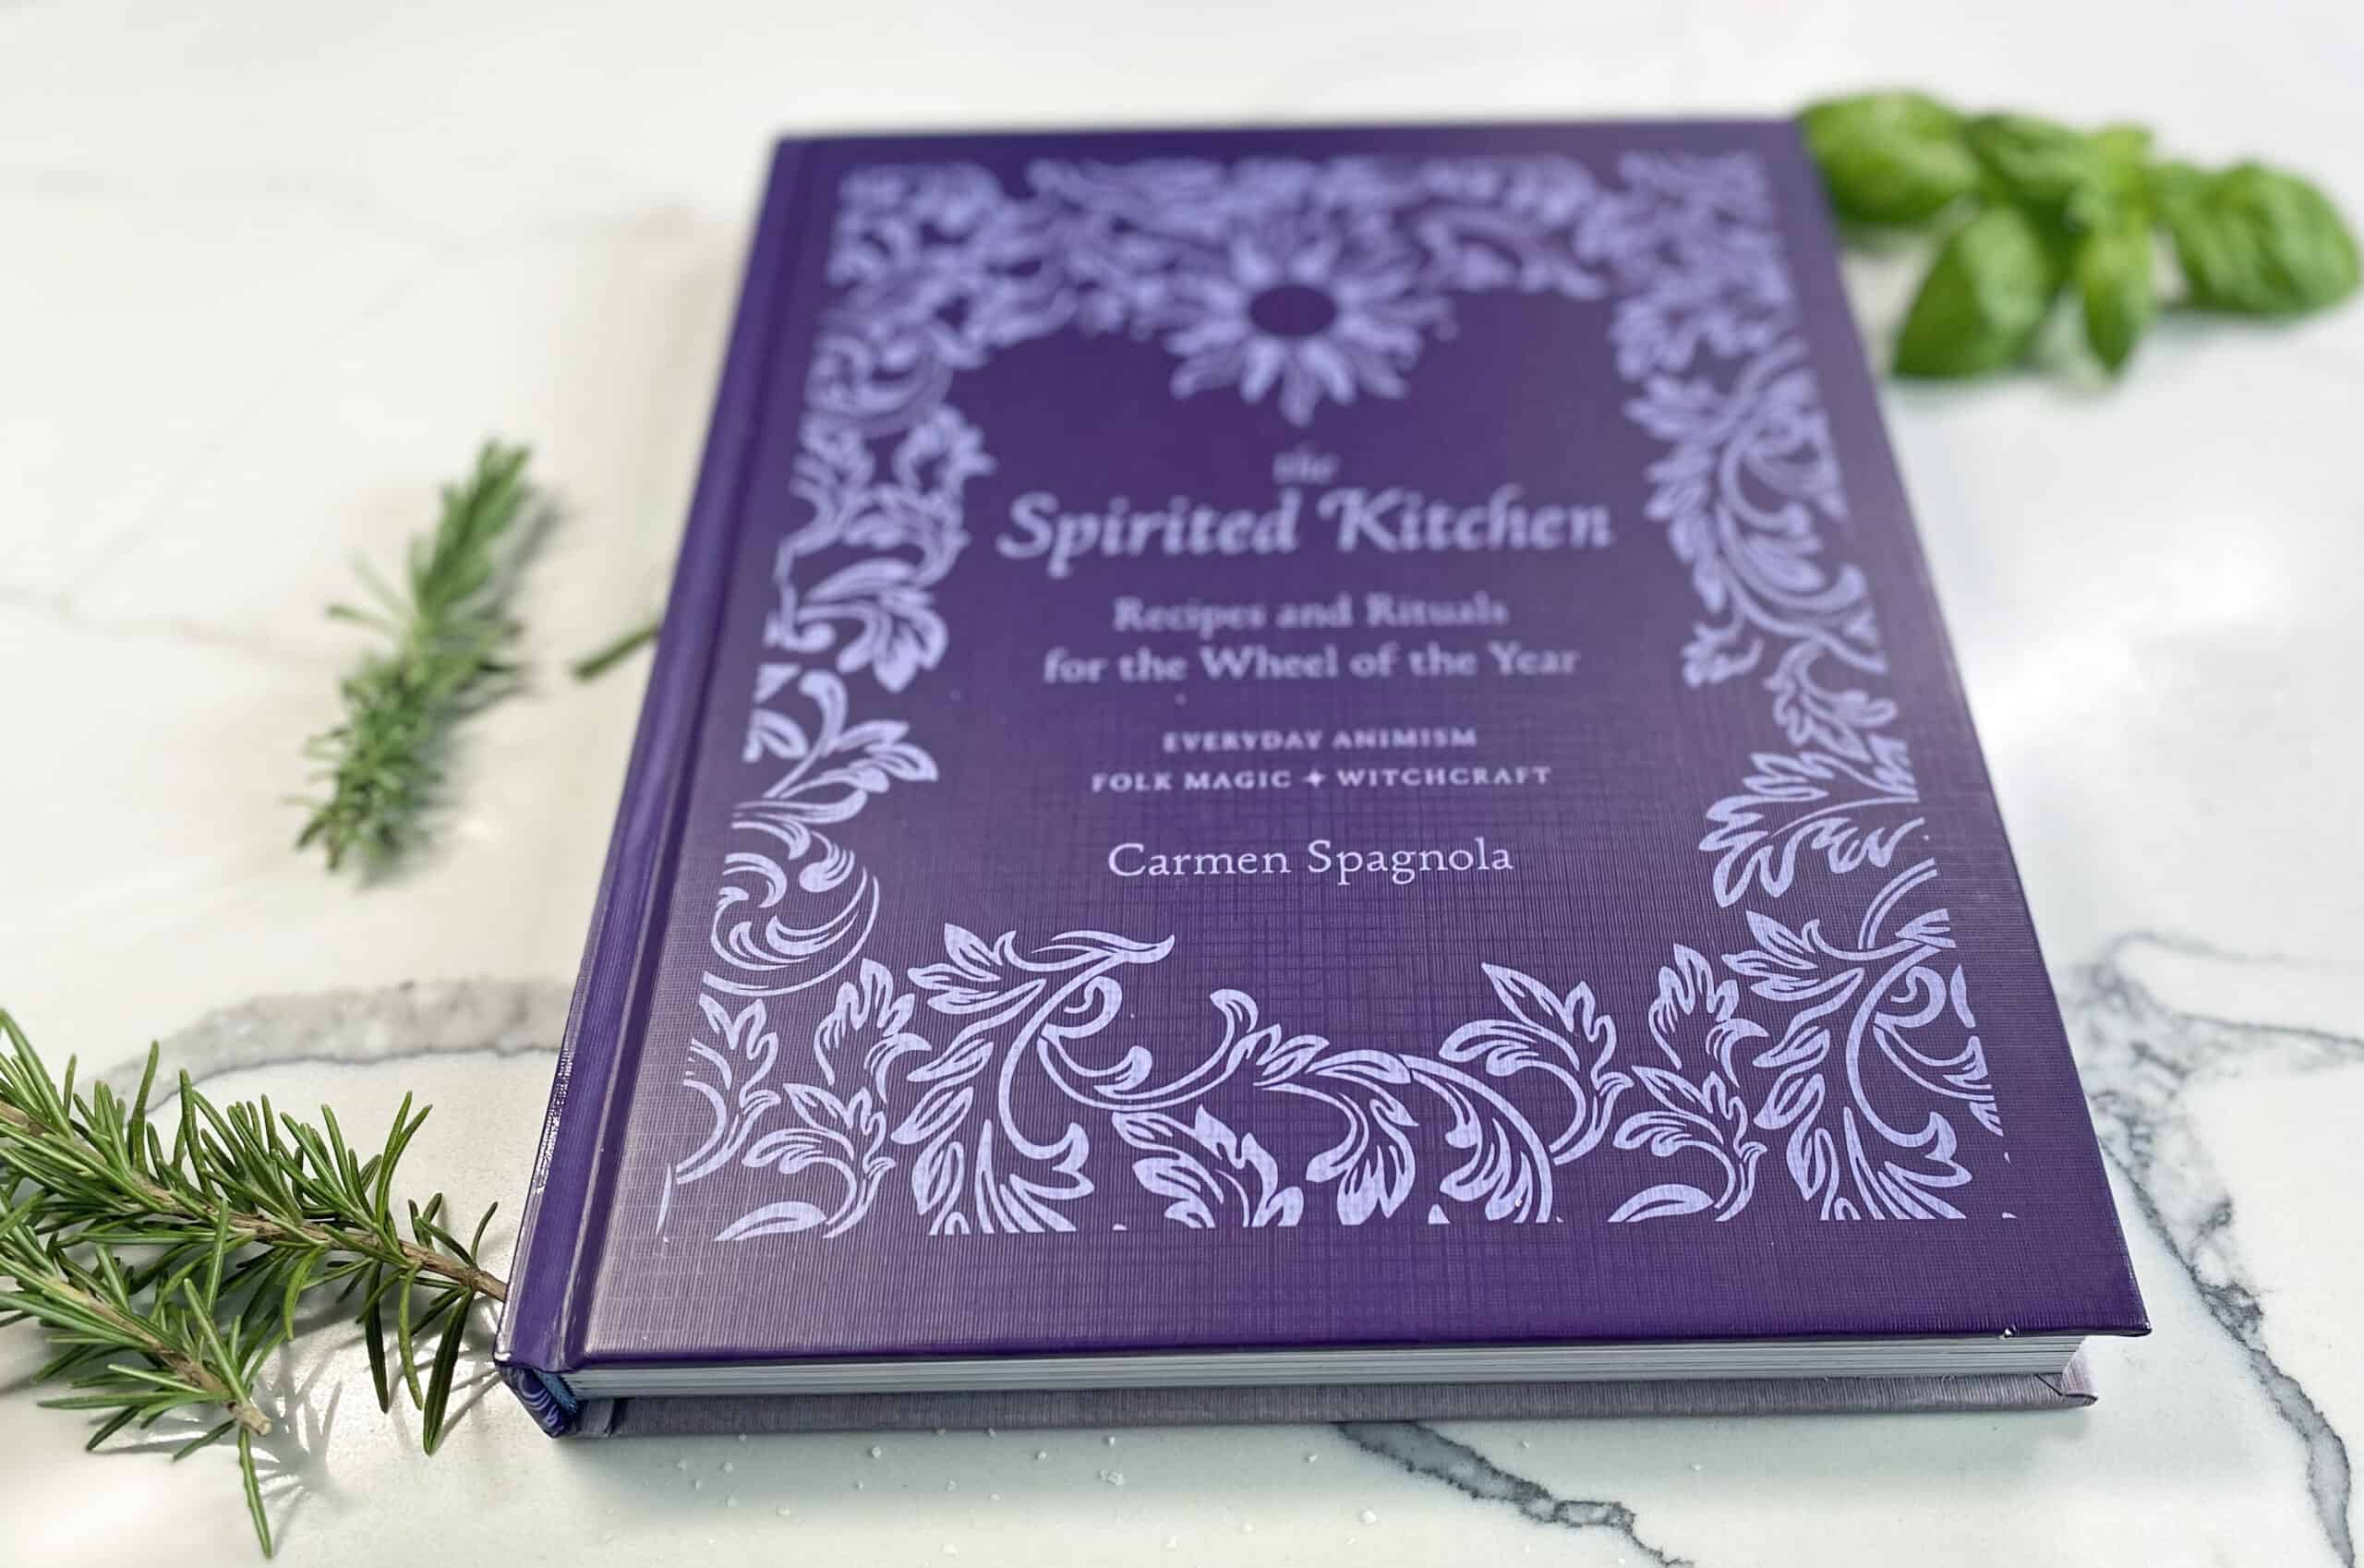 The Spirited Kitchen: Recipes and Rituals for a Happy Home